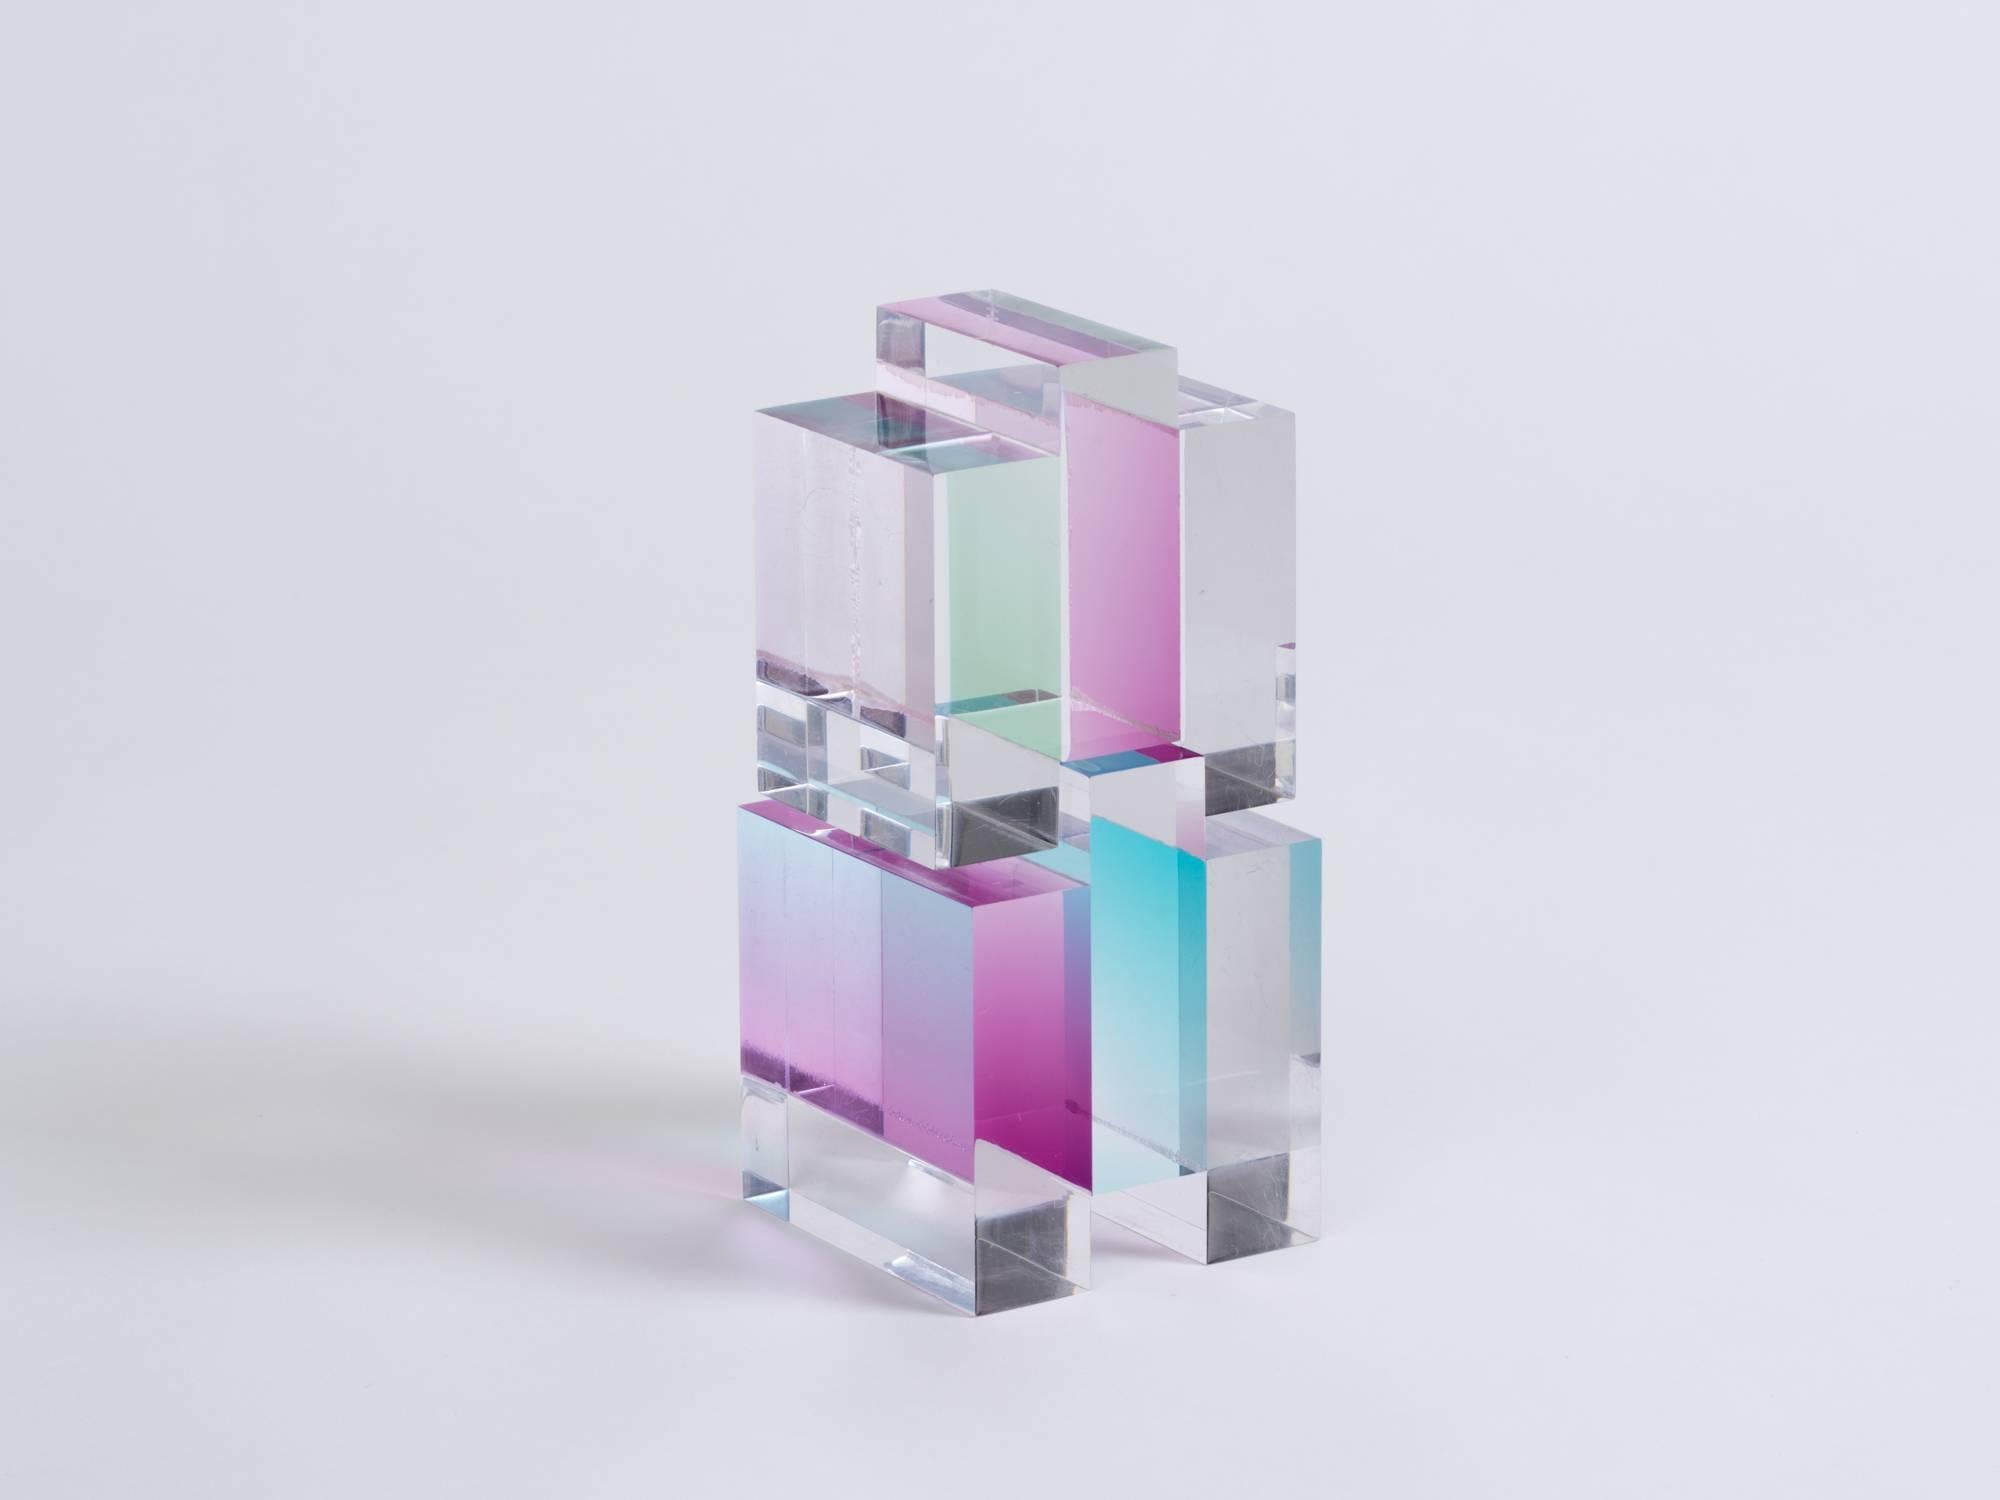 Stacking two-piece clear, magenta and turquoise acrylic cubist sculpture give an optical illusion when viewed from different perspectives. Unsigned, attributed to Vasa Mihich.